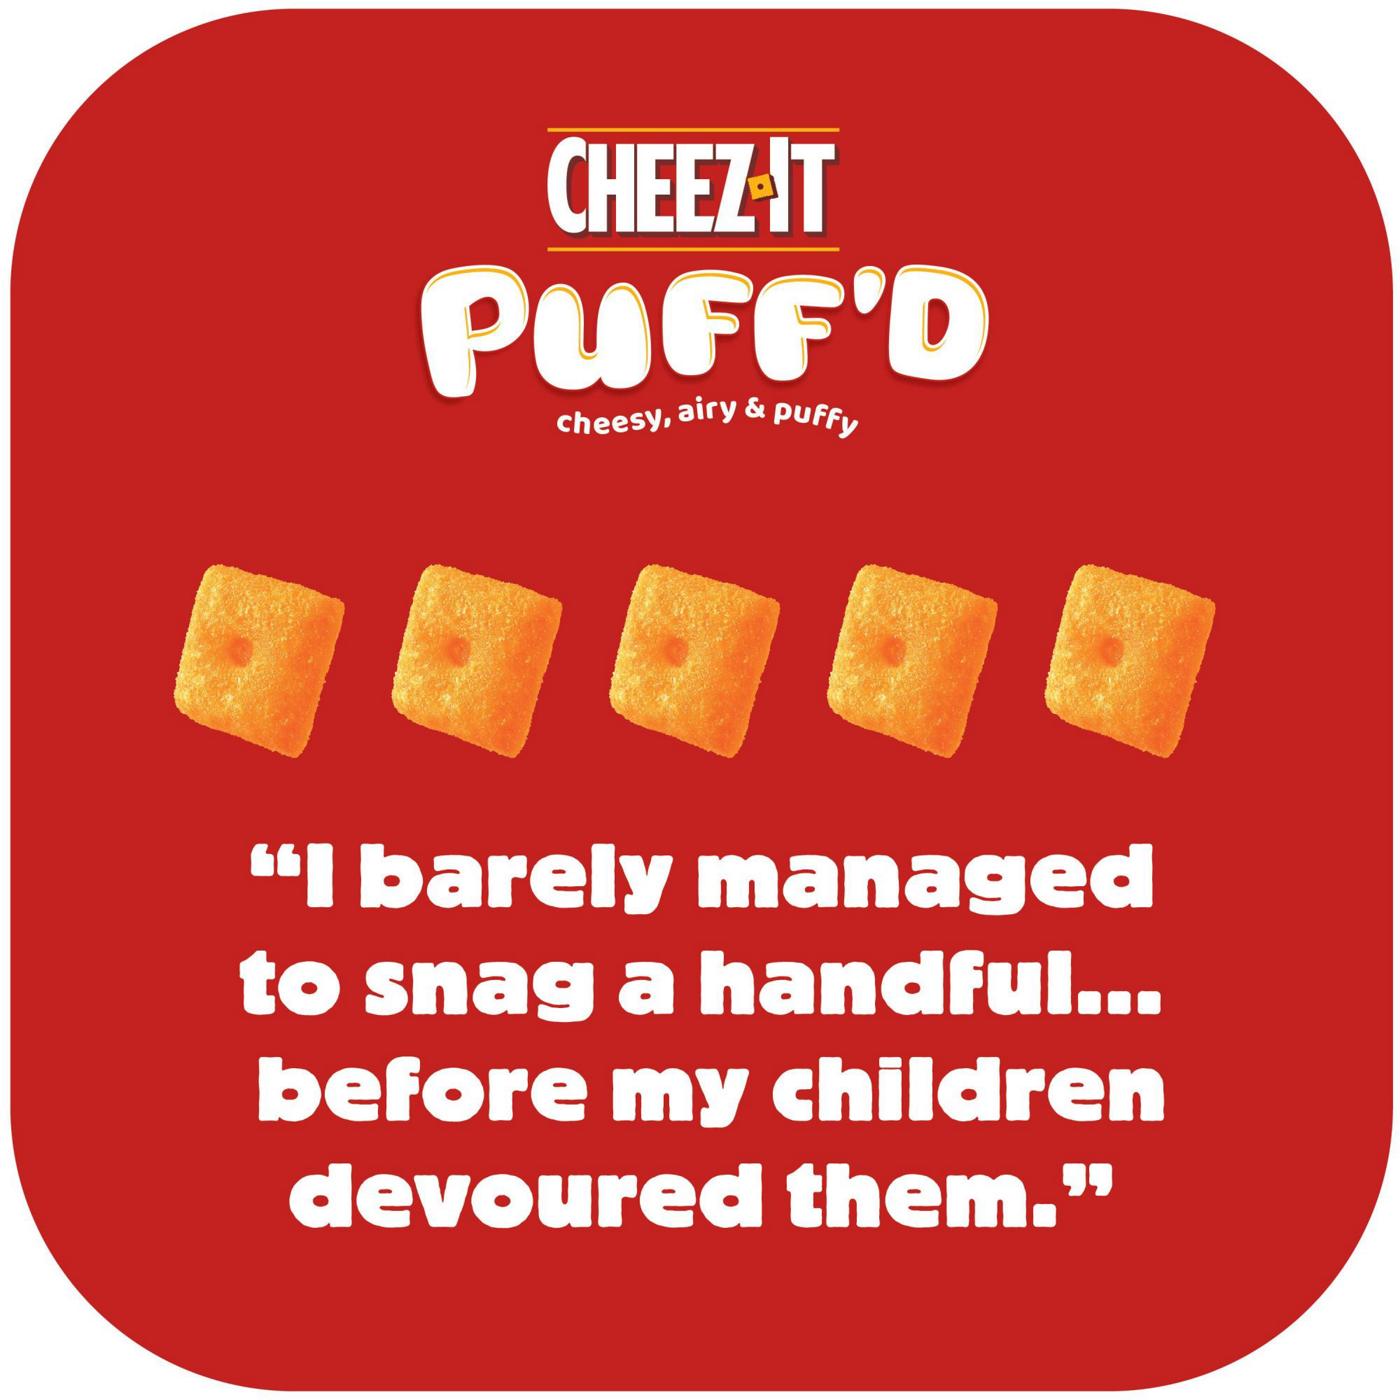 Cheez-It Puff'd Double Cheese Cheesy Baked Snacks; image 3 of 4